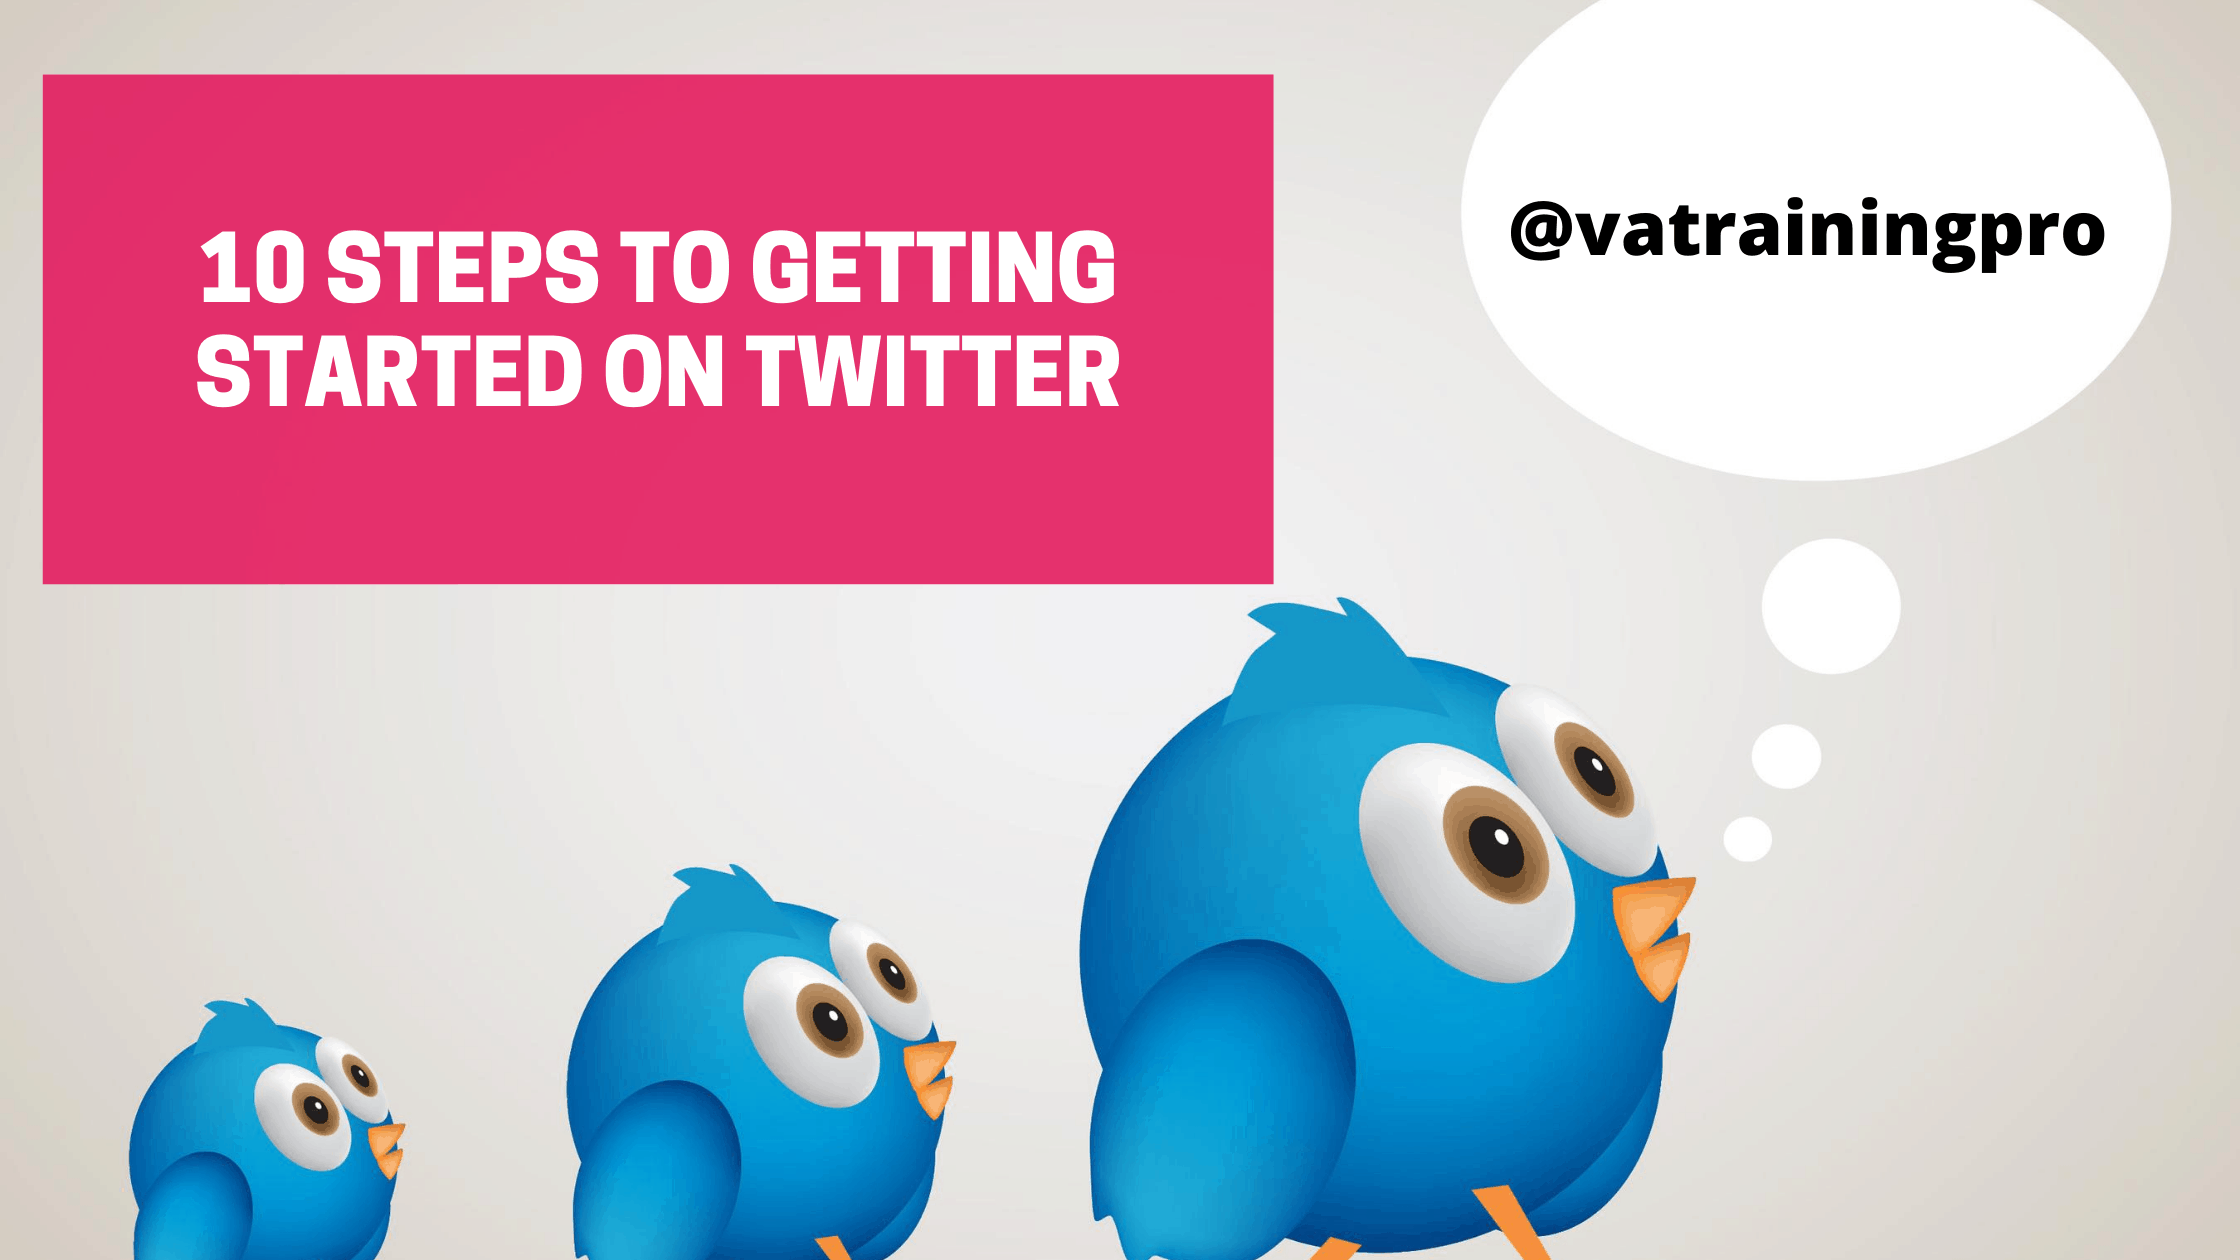 10 Steps to getting started on Twitter